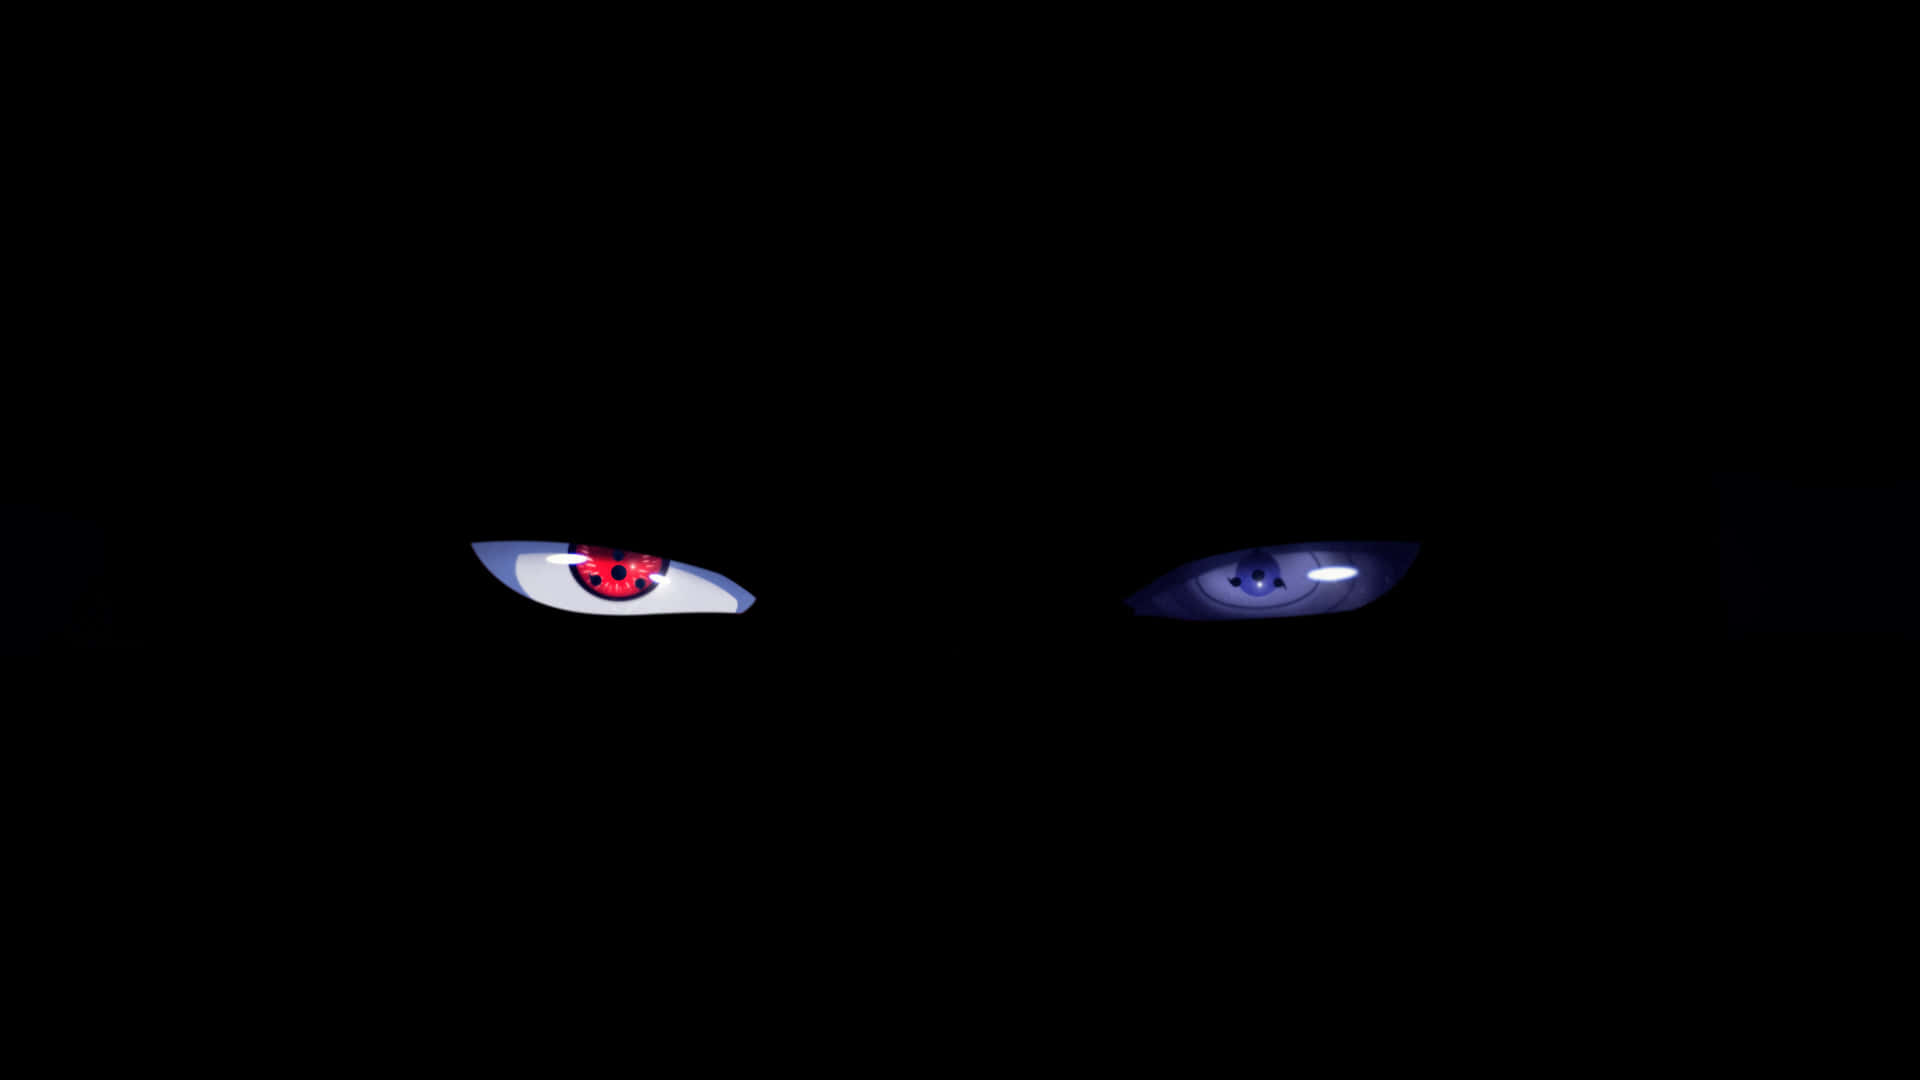 Unlock the power of the Nine-Tailed Beast with Naruto's signature eyes. Wallpaper